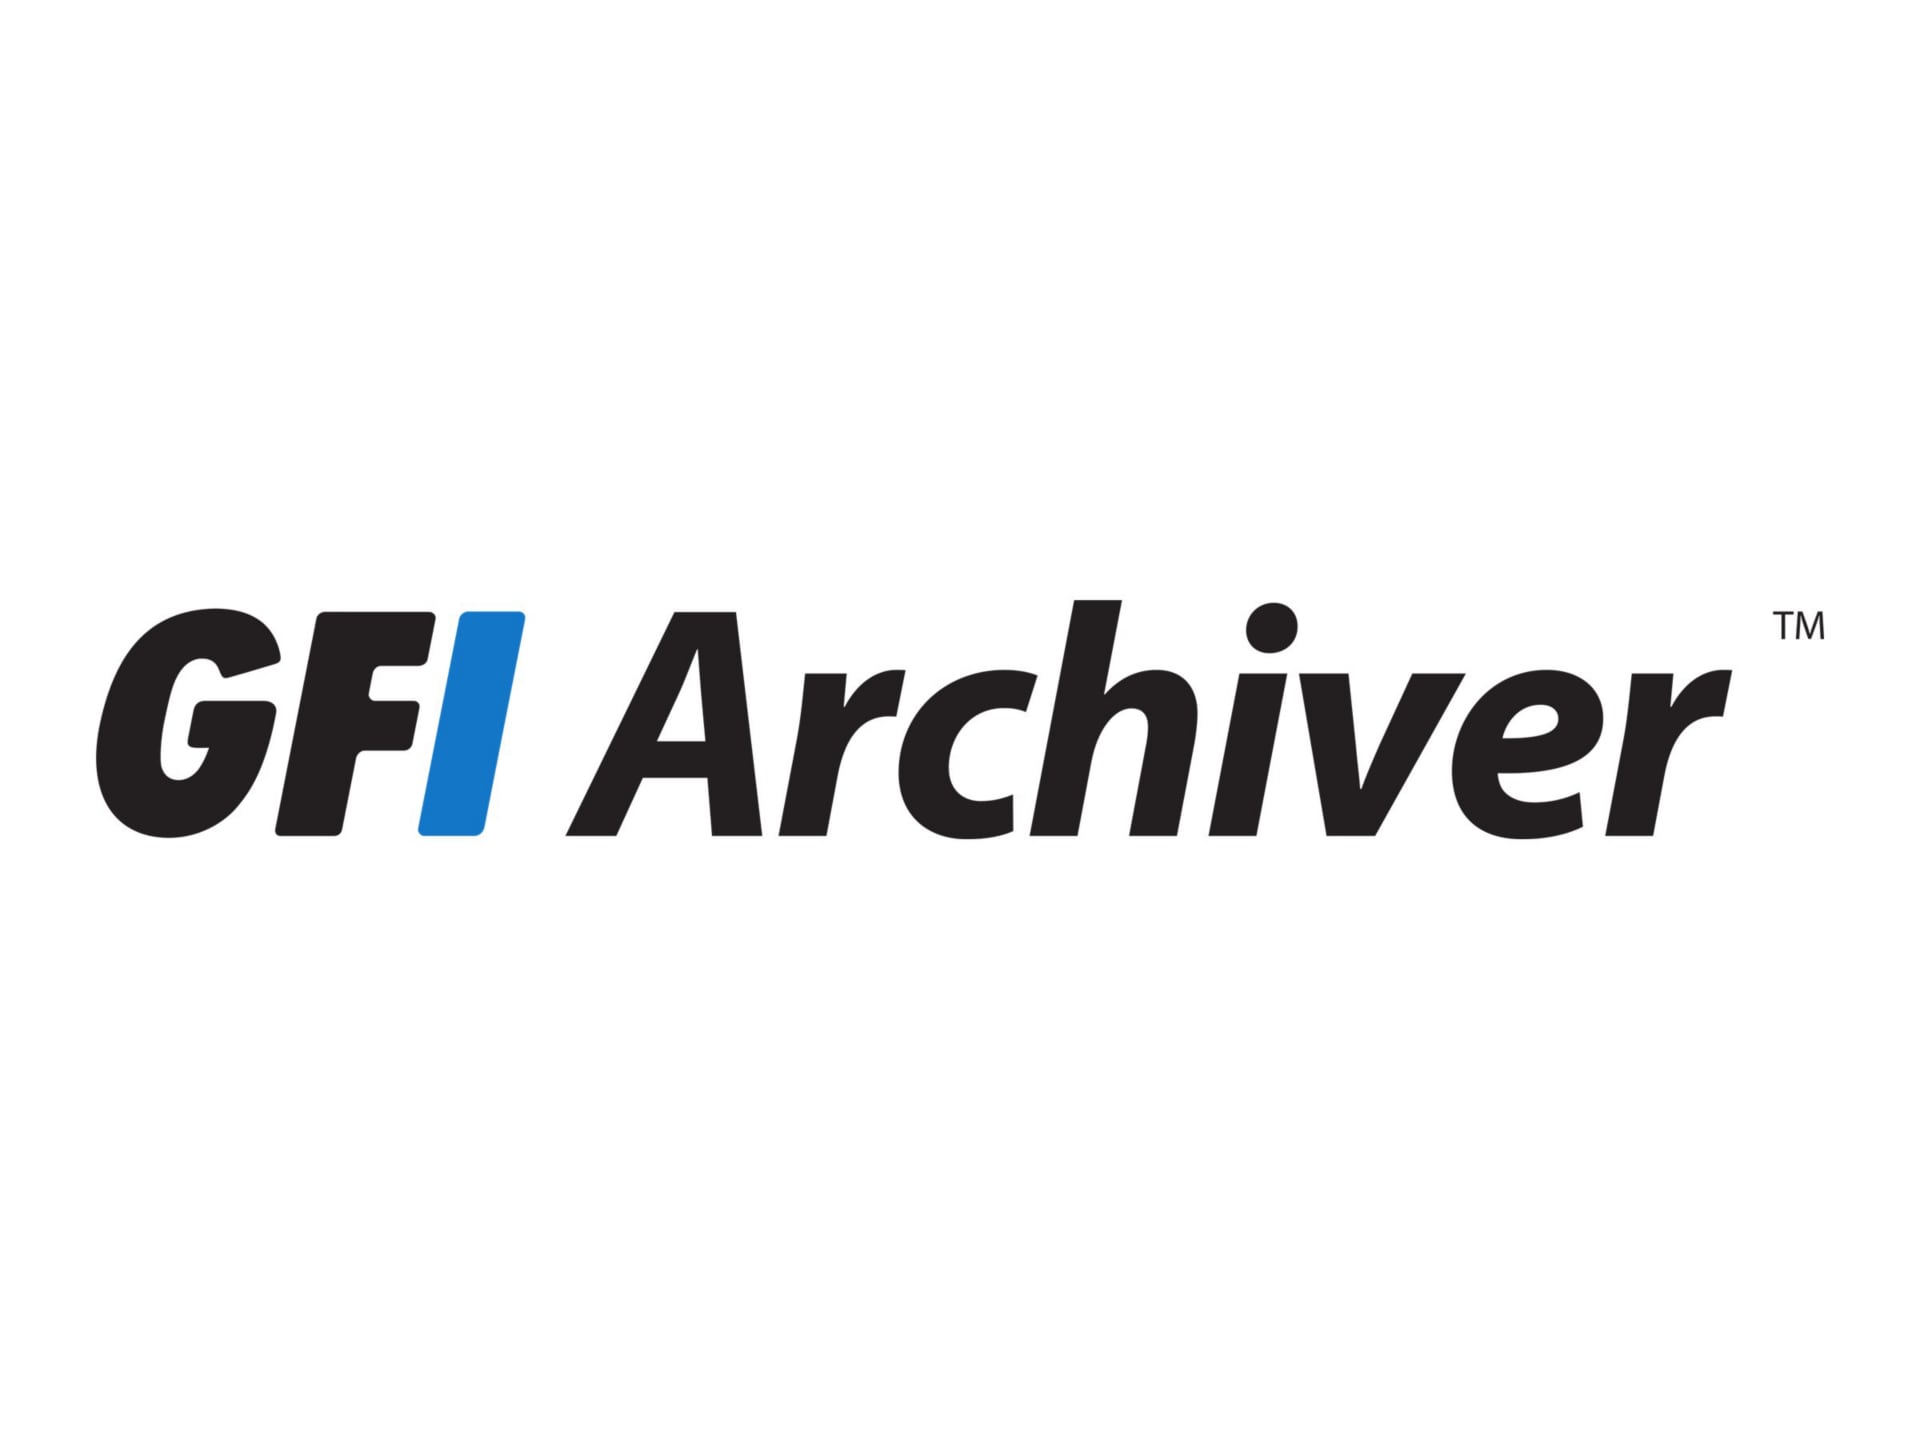 GFI Archiver - subscription license (1 year) - 1 additional mailbox